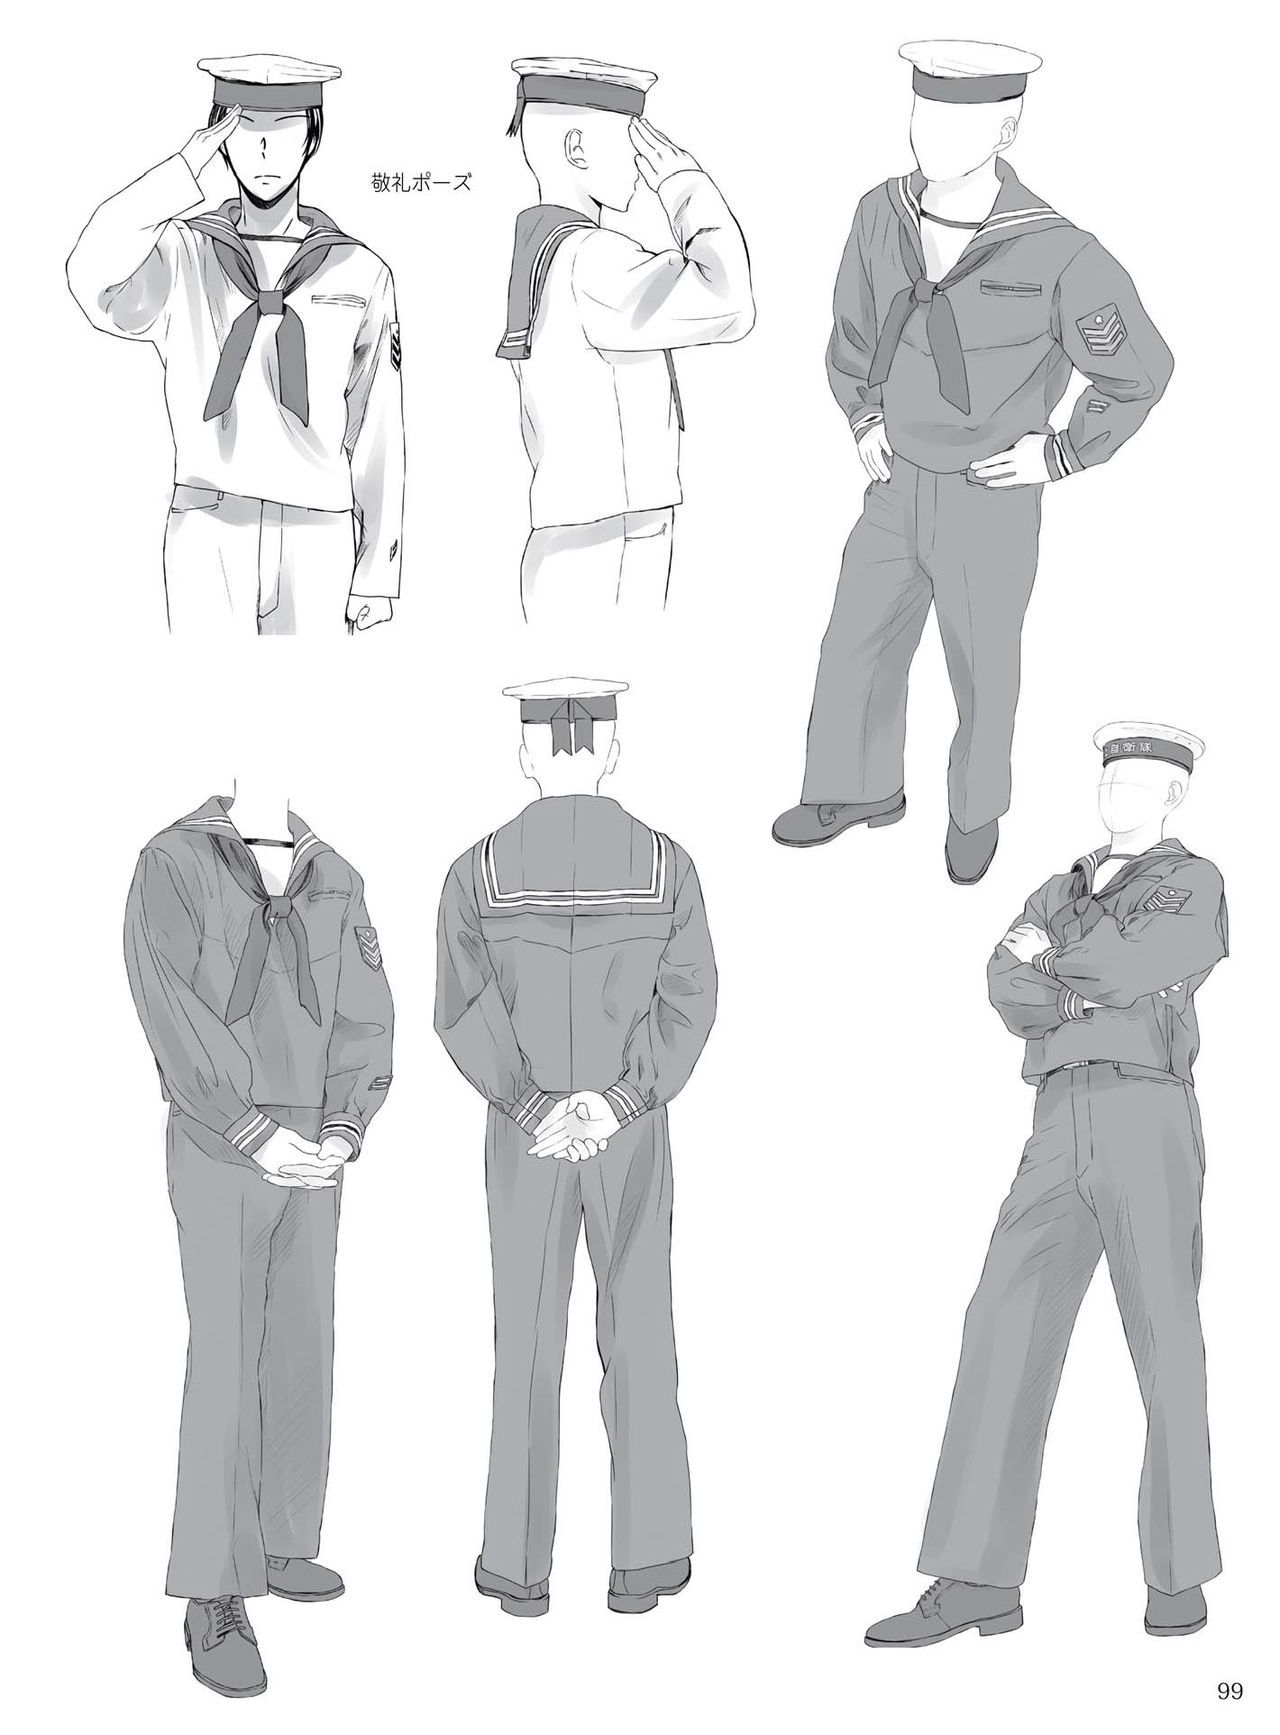 How to draw military uniforms and uniforms From Self-Defense Forces 軍服・制服の描き方 アメリカ軍・自衛隊の制服から戦闘服まで 102